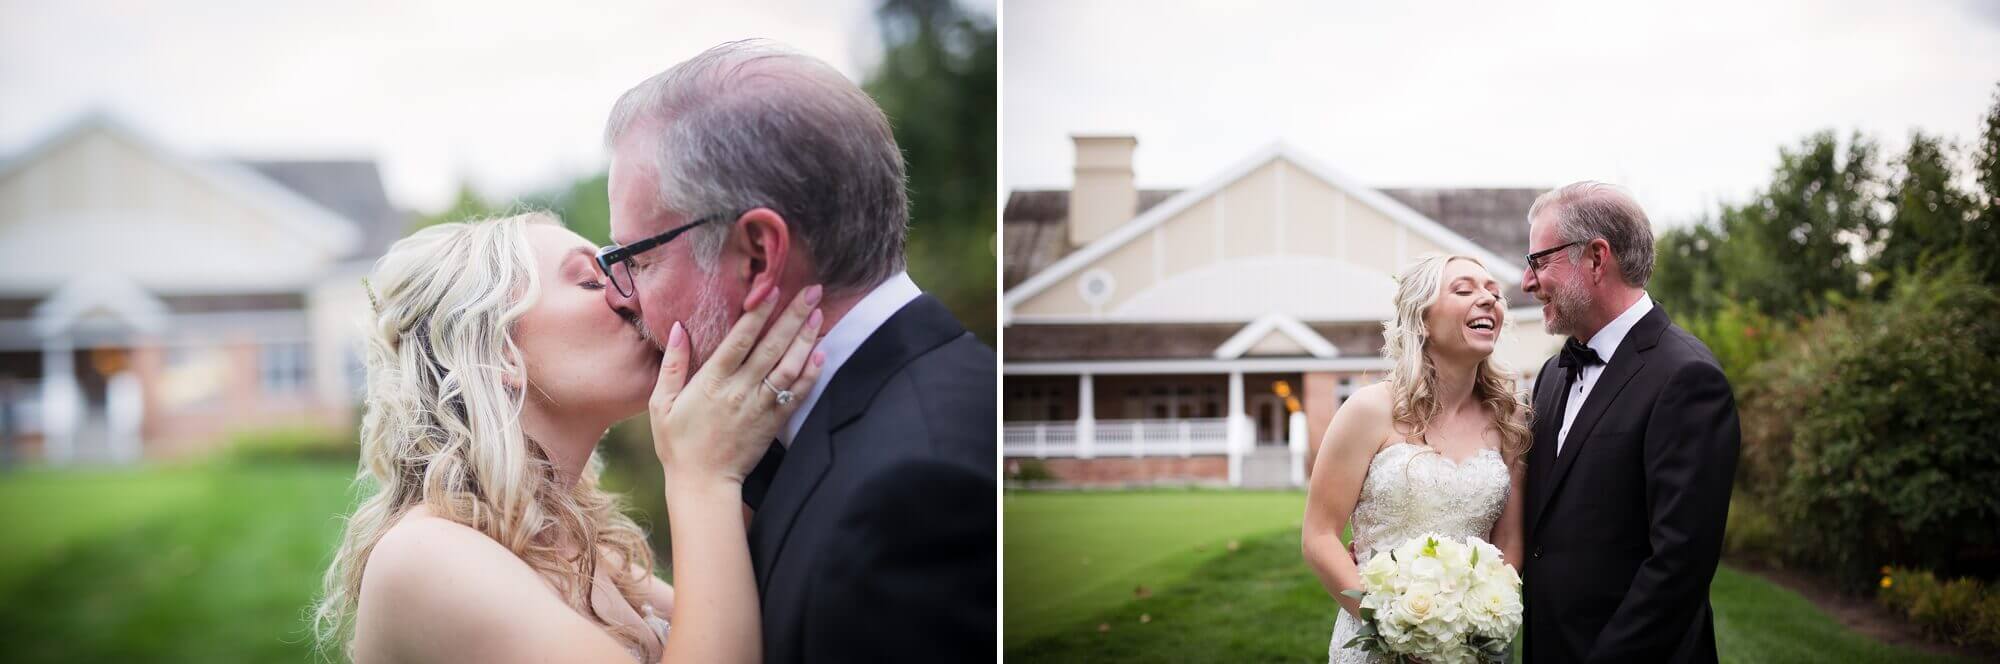 Portraits of the bride and groom kissing at Lambton Golf & Country Club